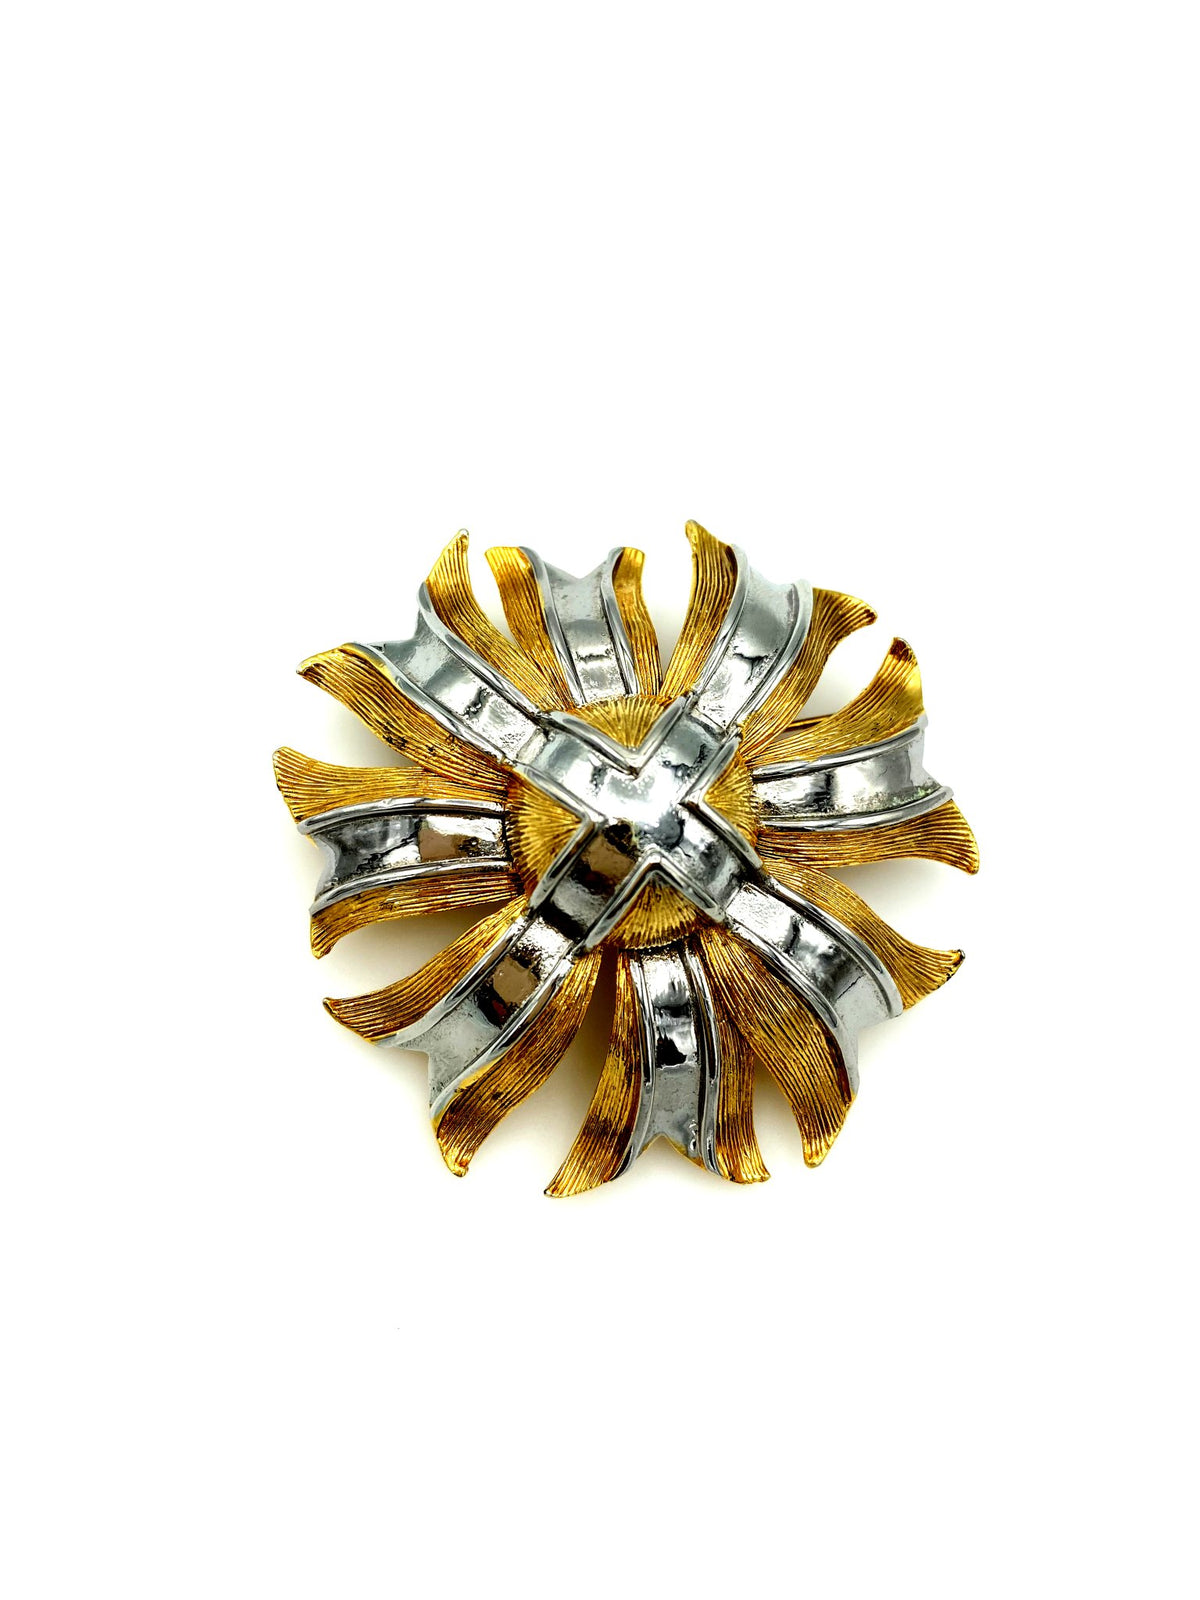 Lisner Vintage Gold & Silver Floral Cross Classic Pin Brooch - 24 Wishes Vintage Jewelry